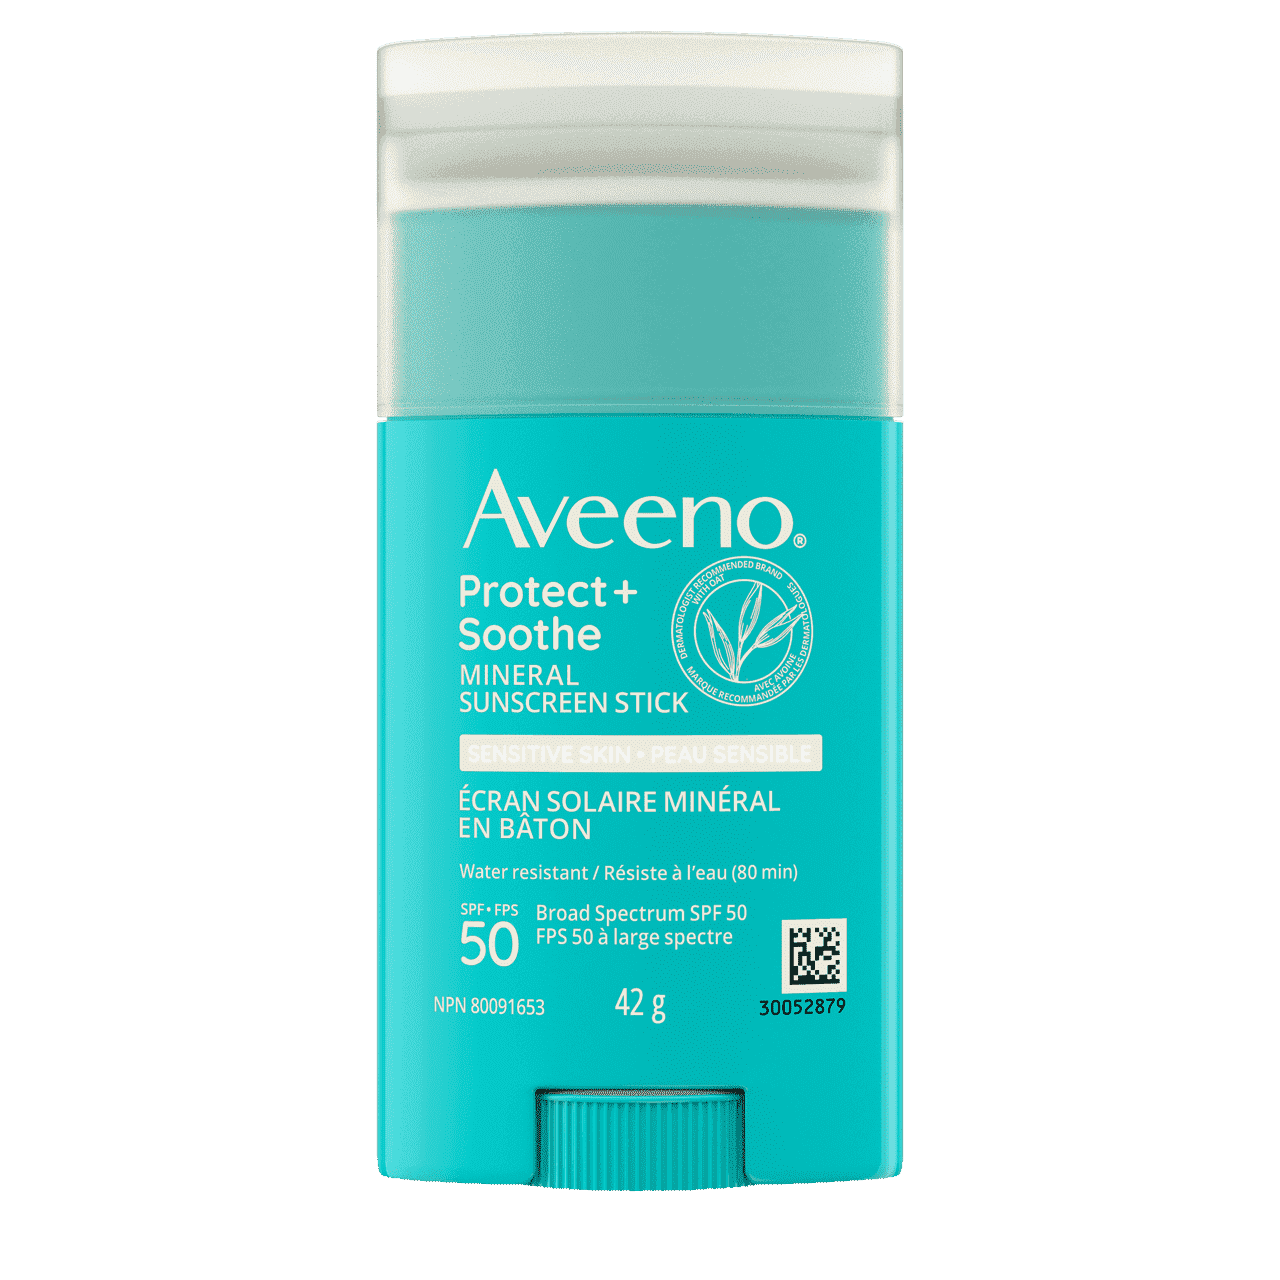 AVEENO® Protect + Soothe Mineral Sunscreen Stick for Sensitive Skin, SPF 50, 42g